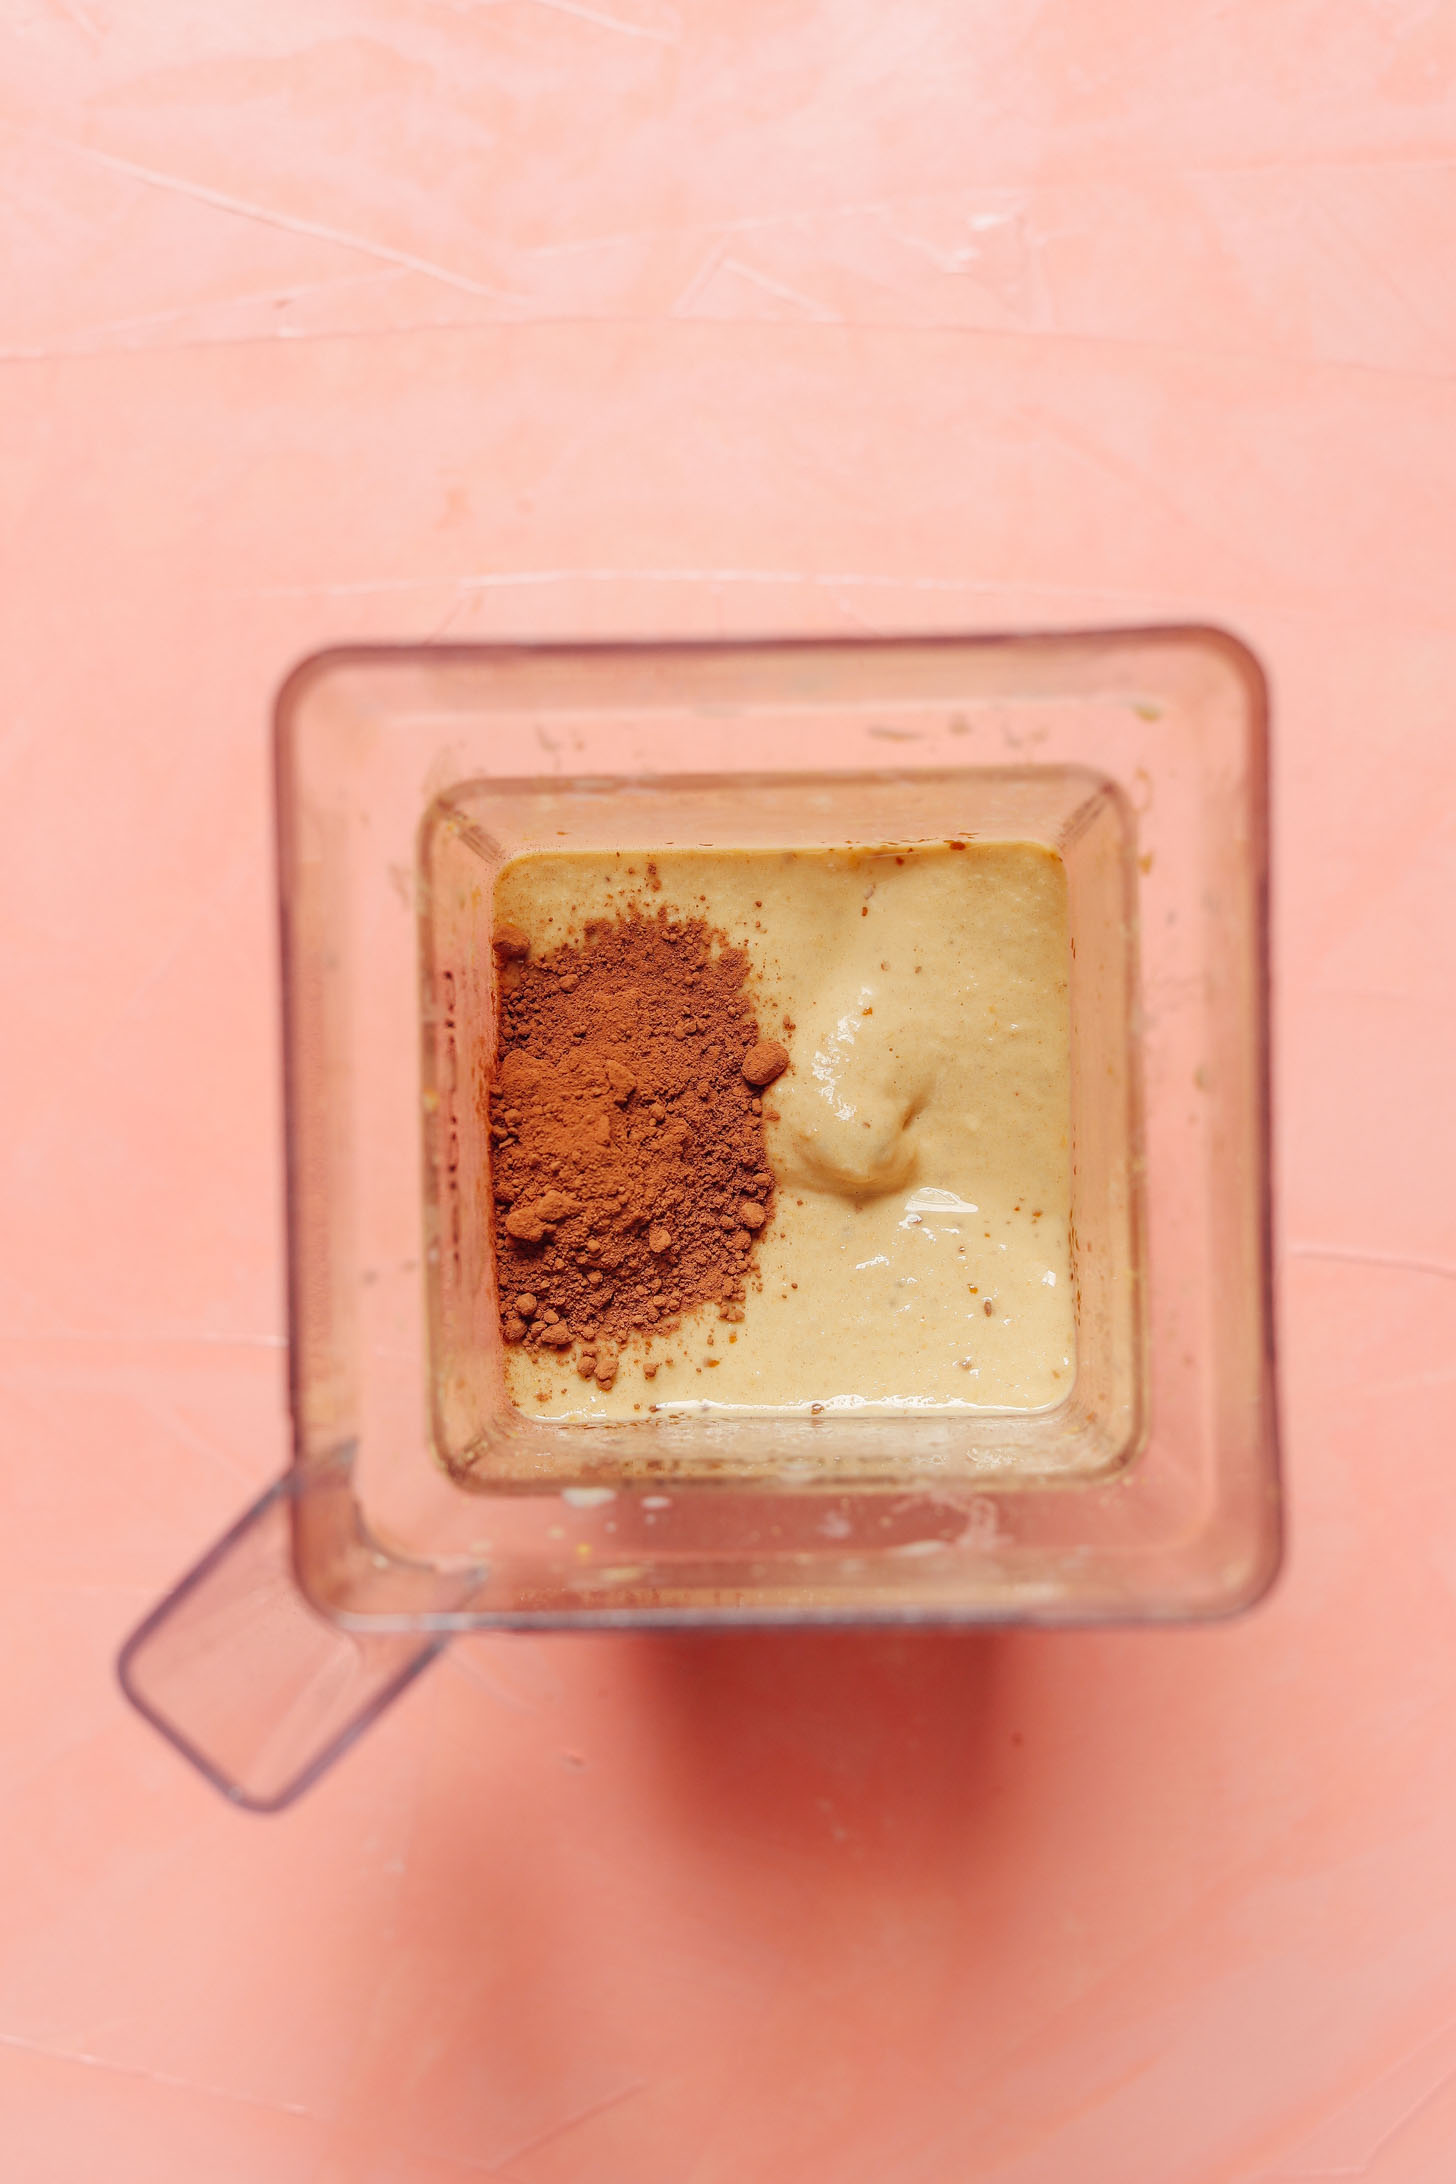 Cocoa powder in a blender for our Creamy Chocolate Chickpea Shake recipe